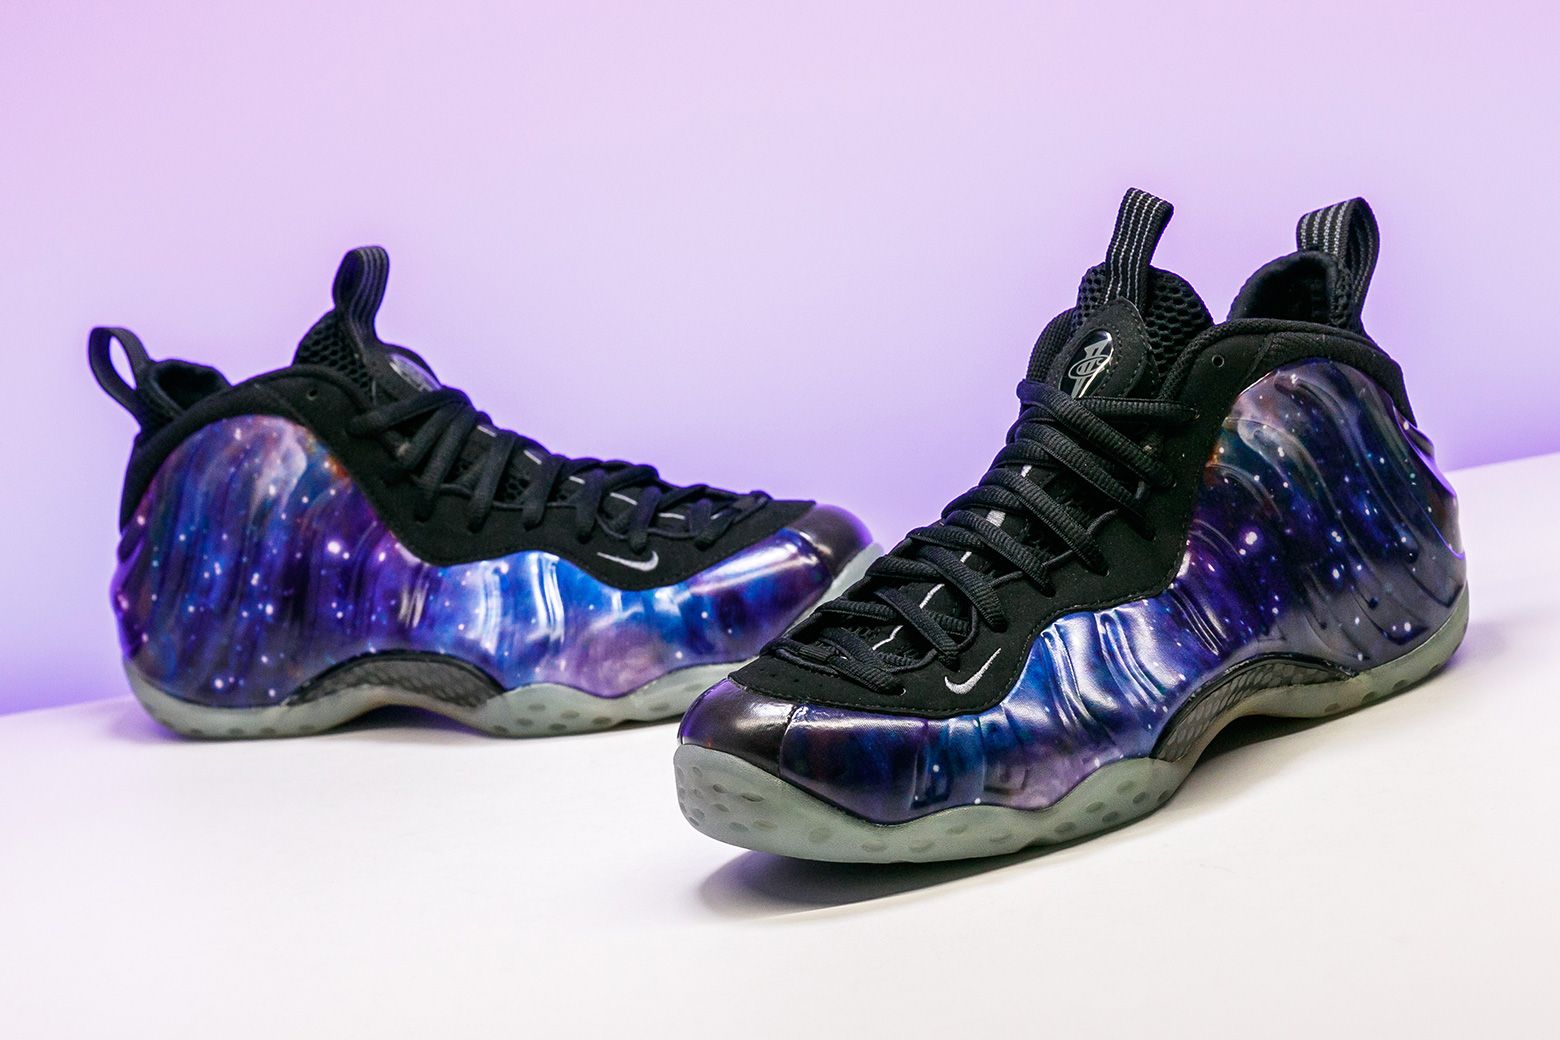 the original nike air foamposite one was partly inspired by what type of animal